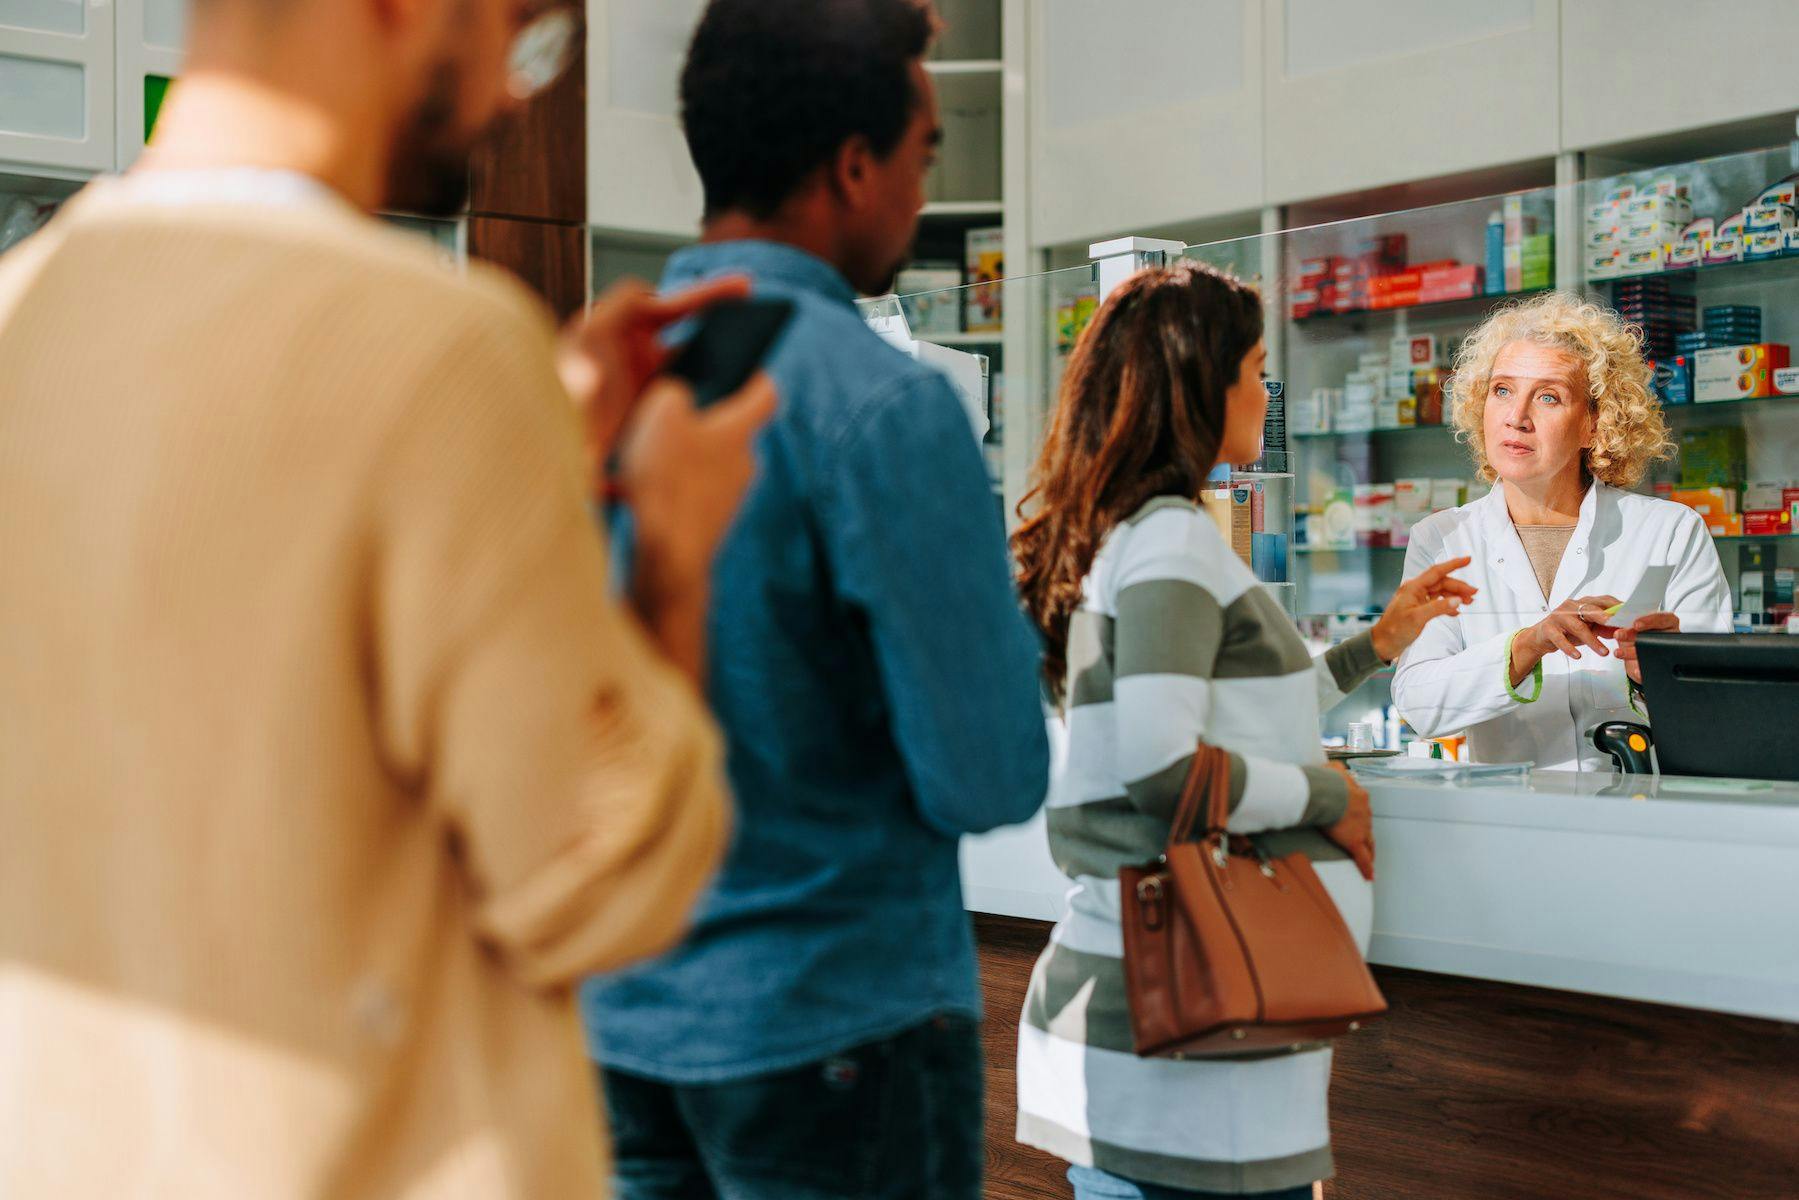 Demographics Significantly Influence Common Customer Behavior at Community Pharmacies